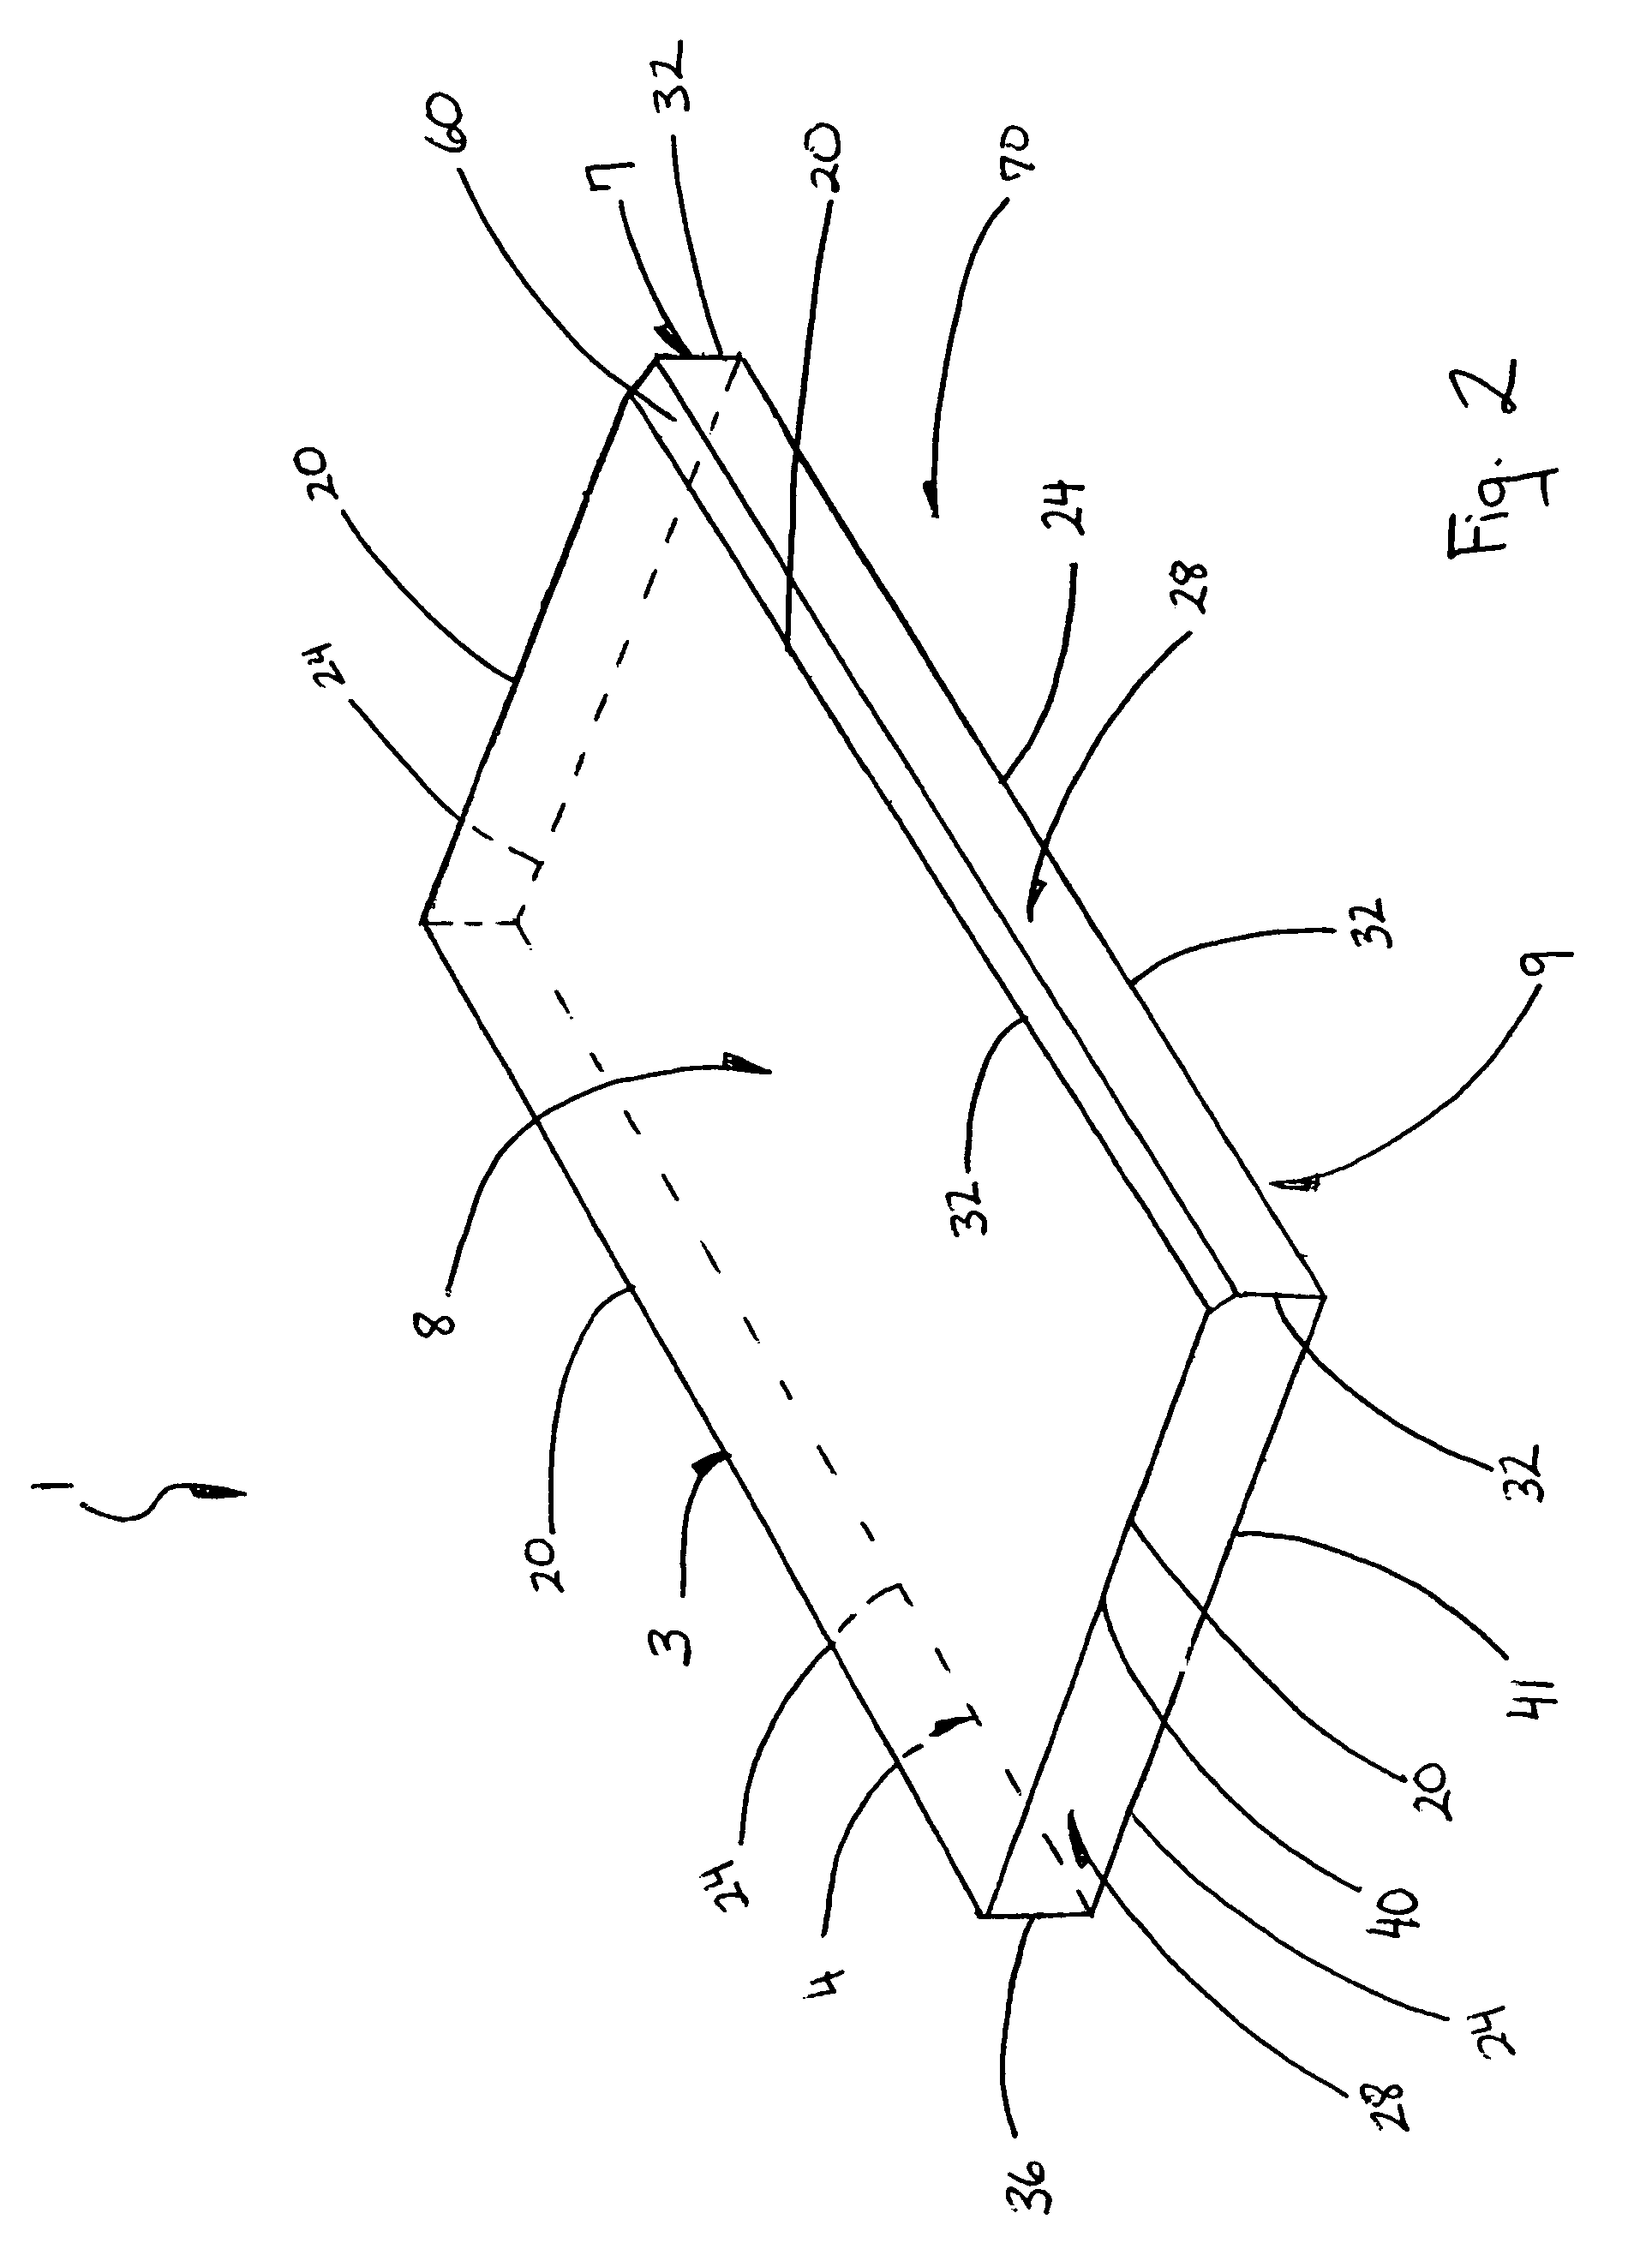 Process for manufacturing wood-based composite panel with reduced top surface edge flare